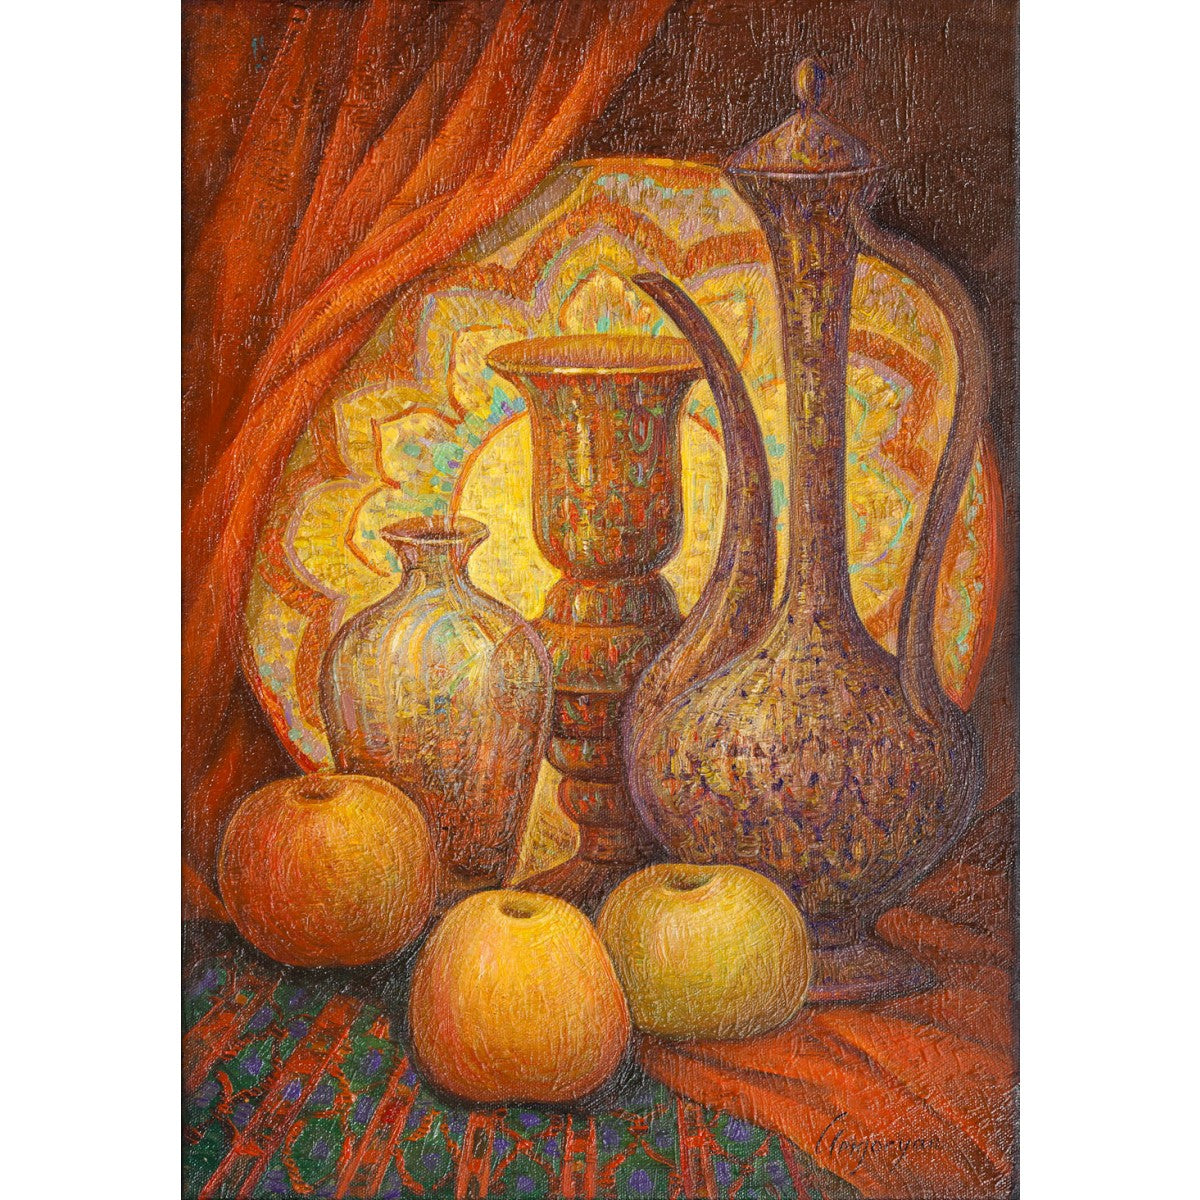 Fruits and Pitchers by Marina Grigoryan